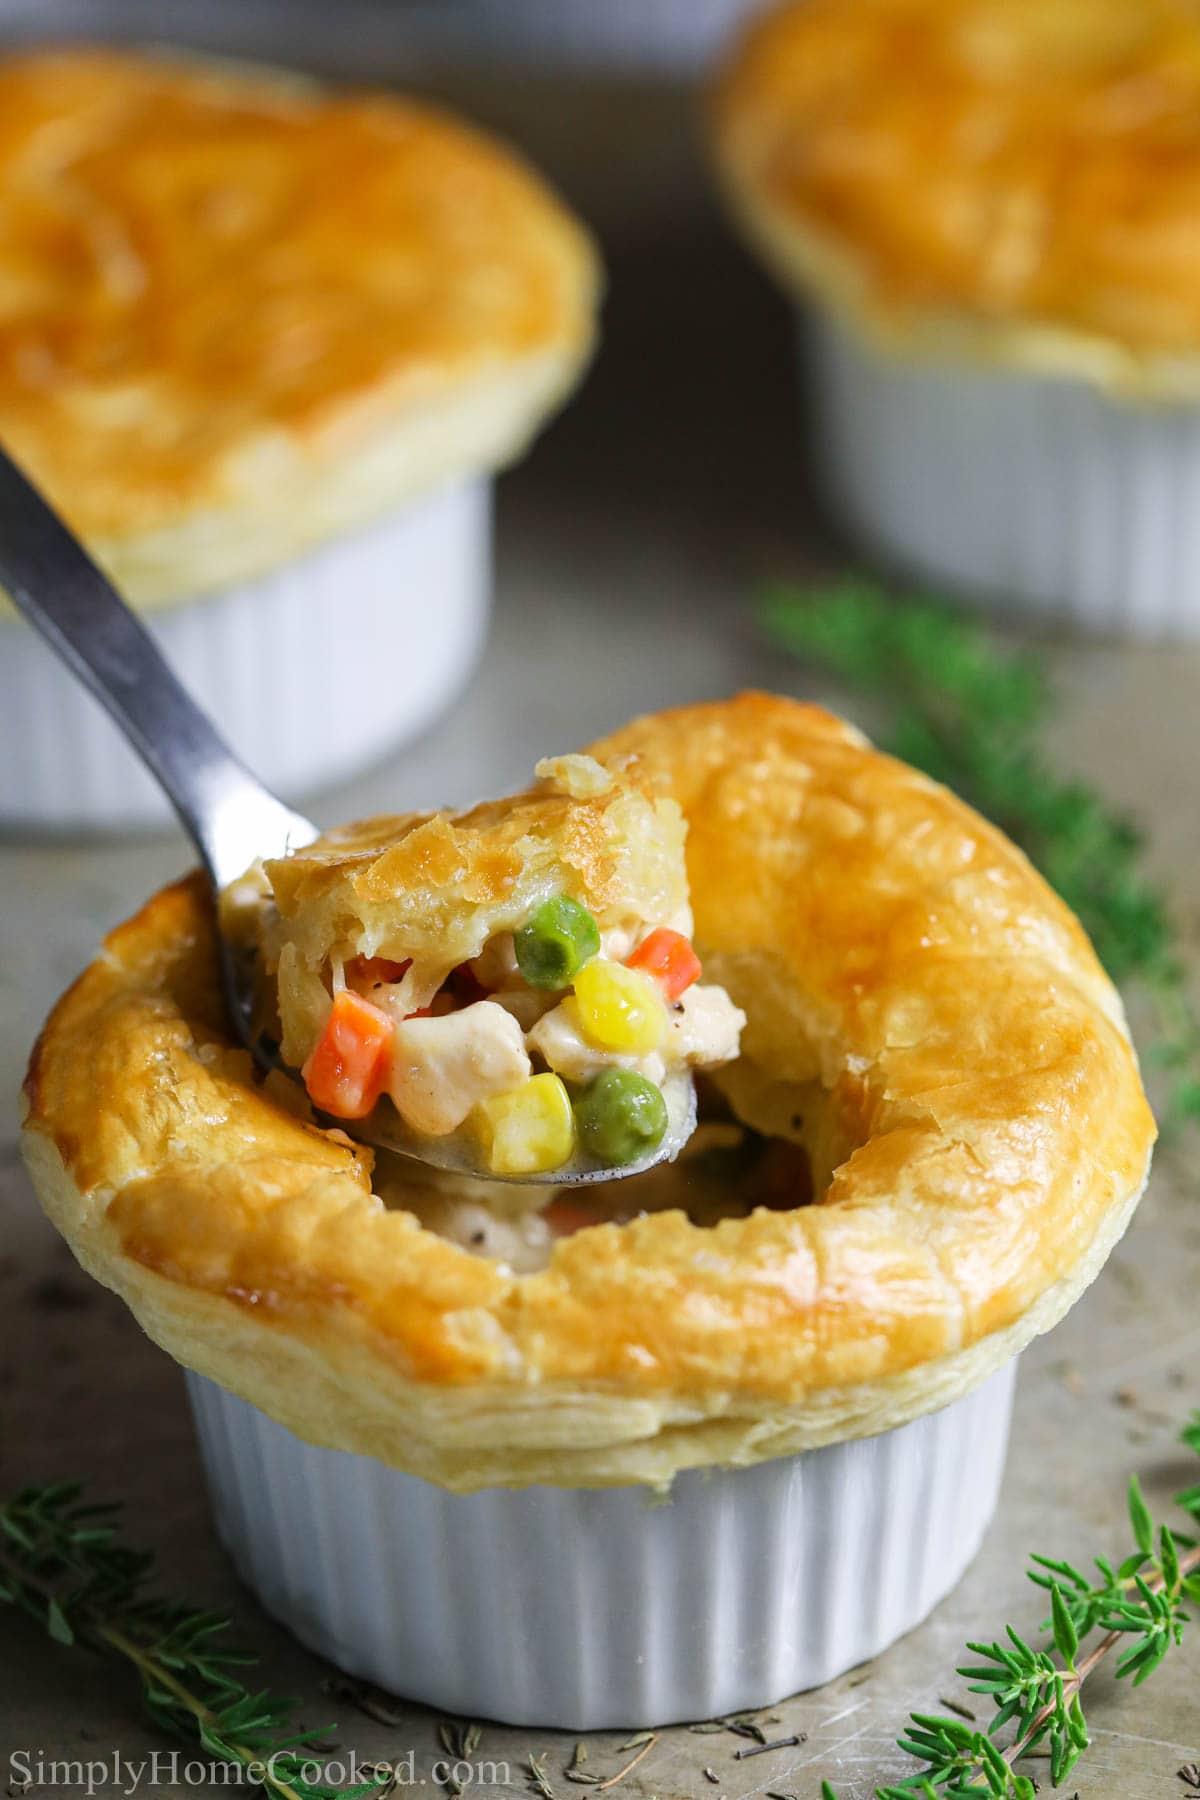 Vertical image of a spoonful of Mini Chicken Pot Pie.